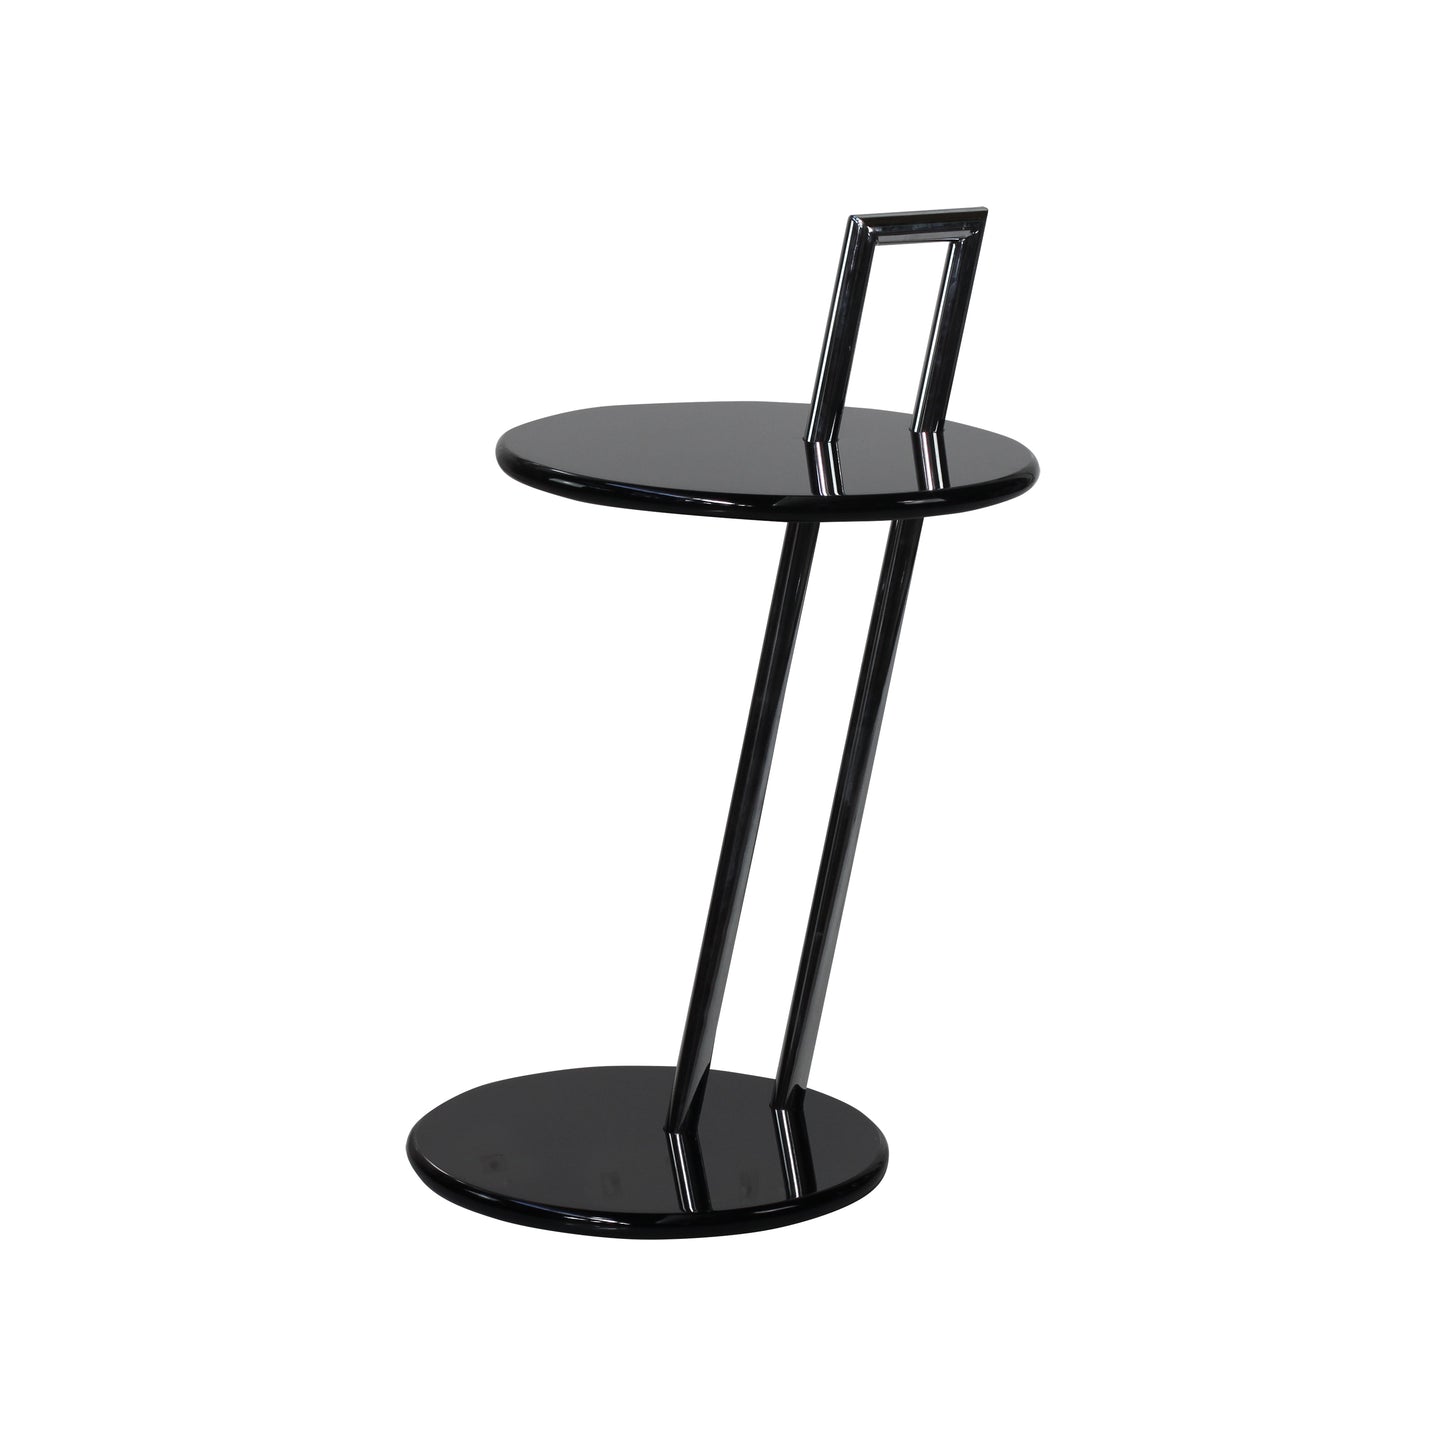 The occasional table style | Black | Side